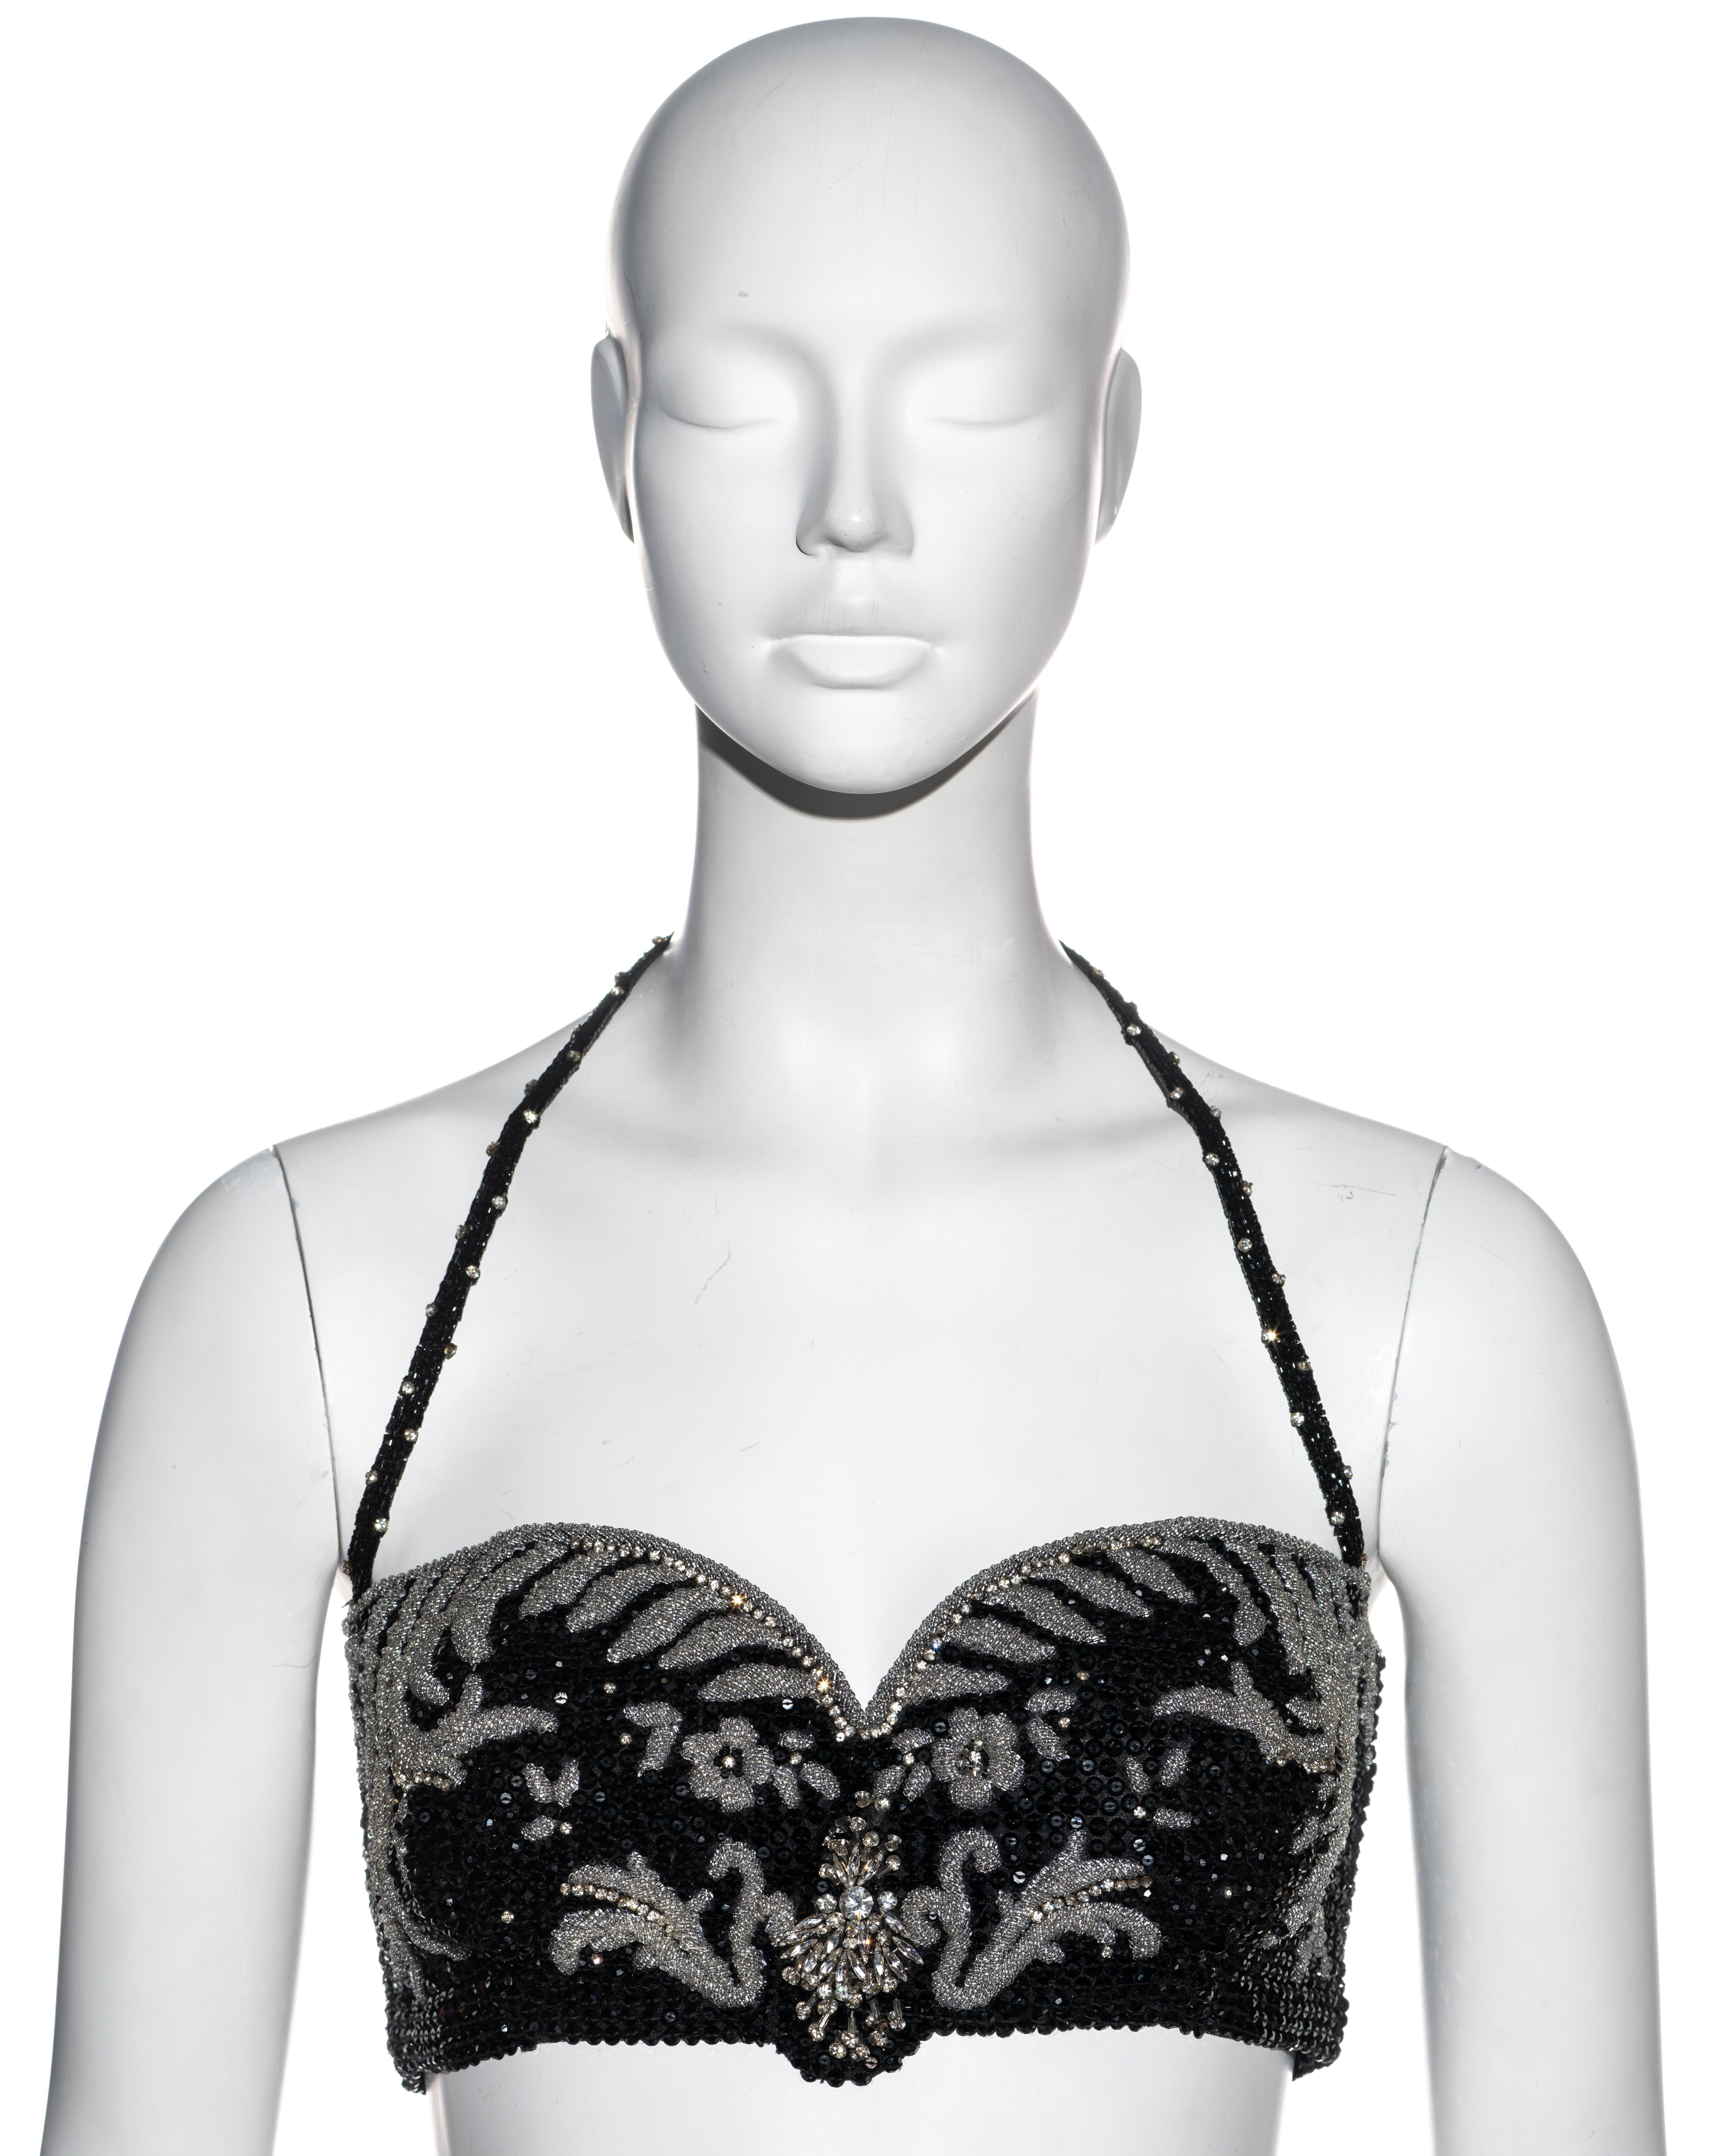 ▪ Gianni Versace silk corset bra 
▪ Fully beaded with black and clear beads 
▪ Crystal embellishment 
▪ Halterneck 
▪ Hook fastenings at centre back 
▪ IT 42 - FR 38 - UK 10 - US 6
▪ Fall-Winter 1989
